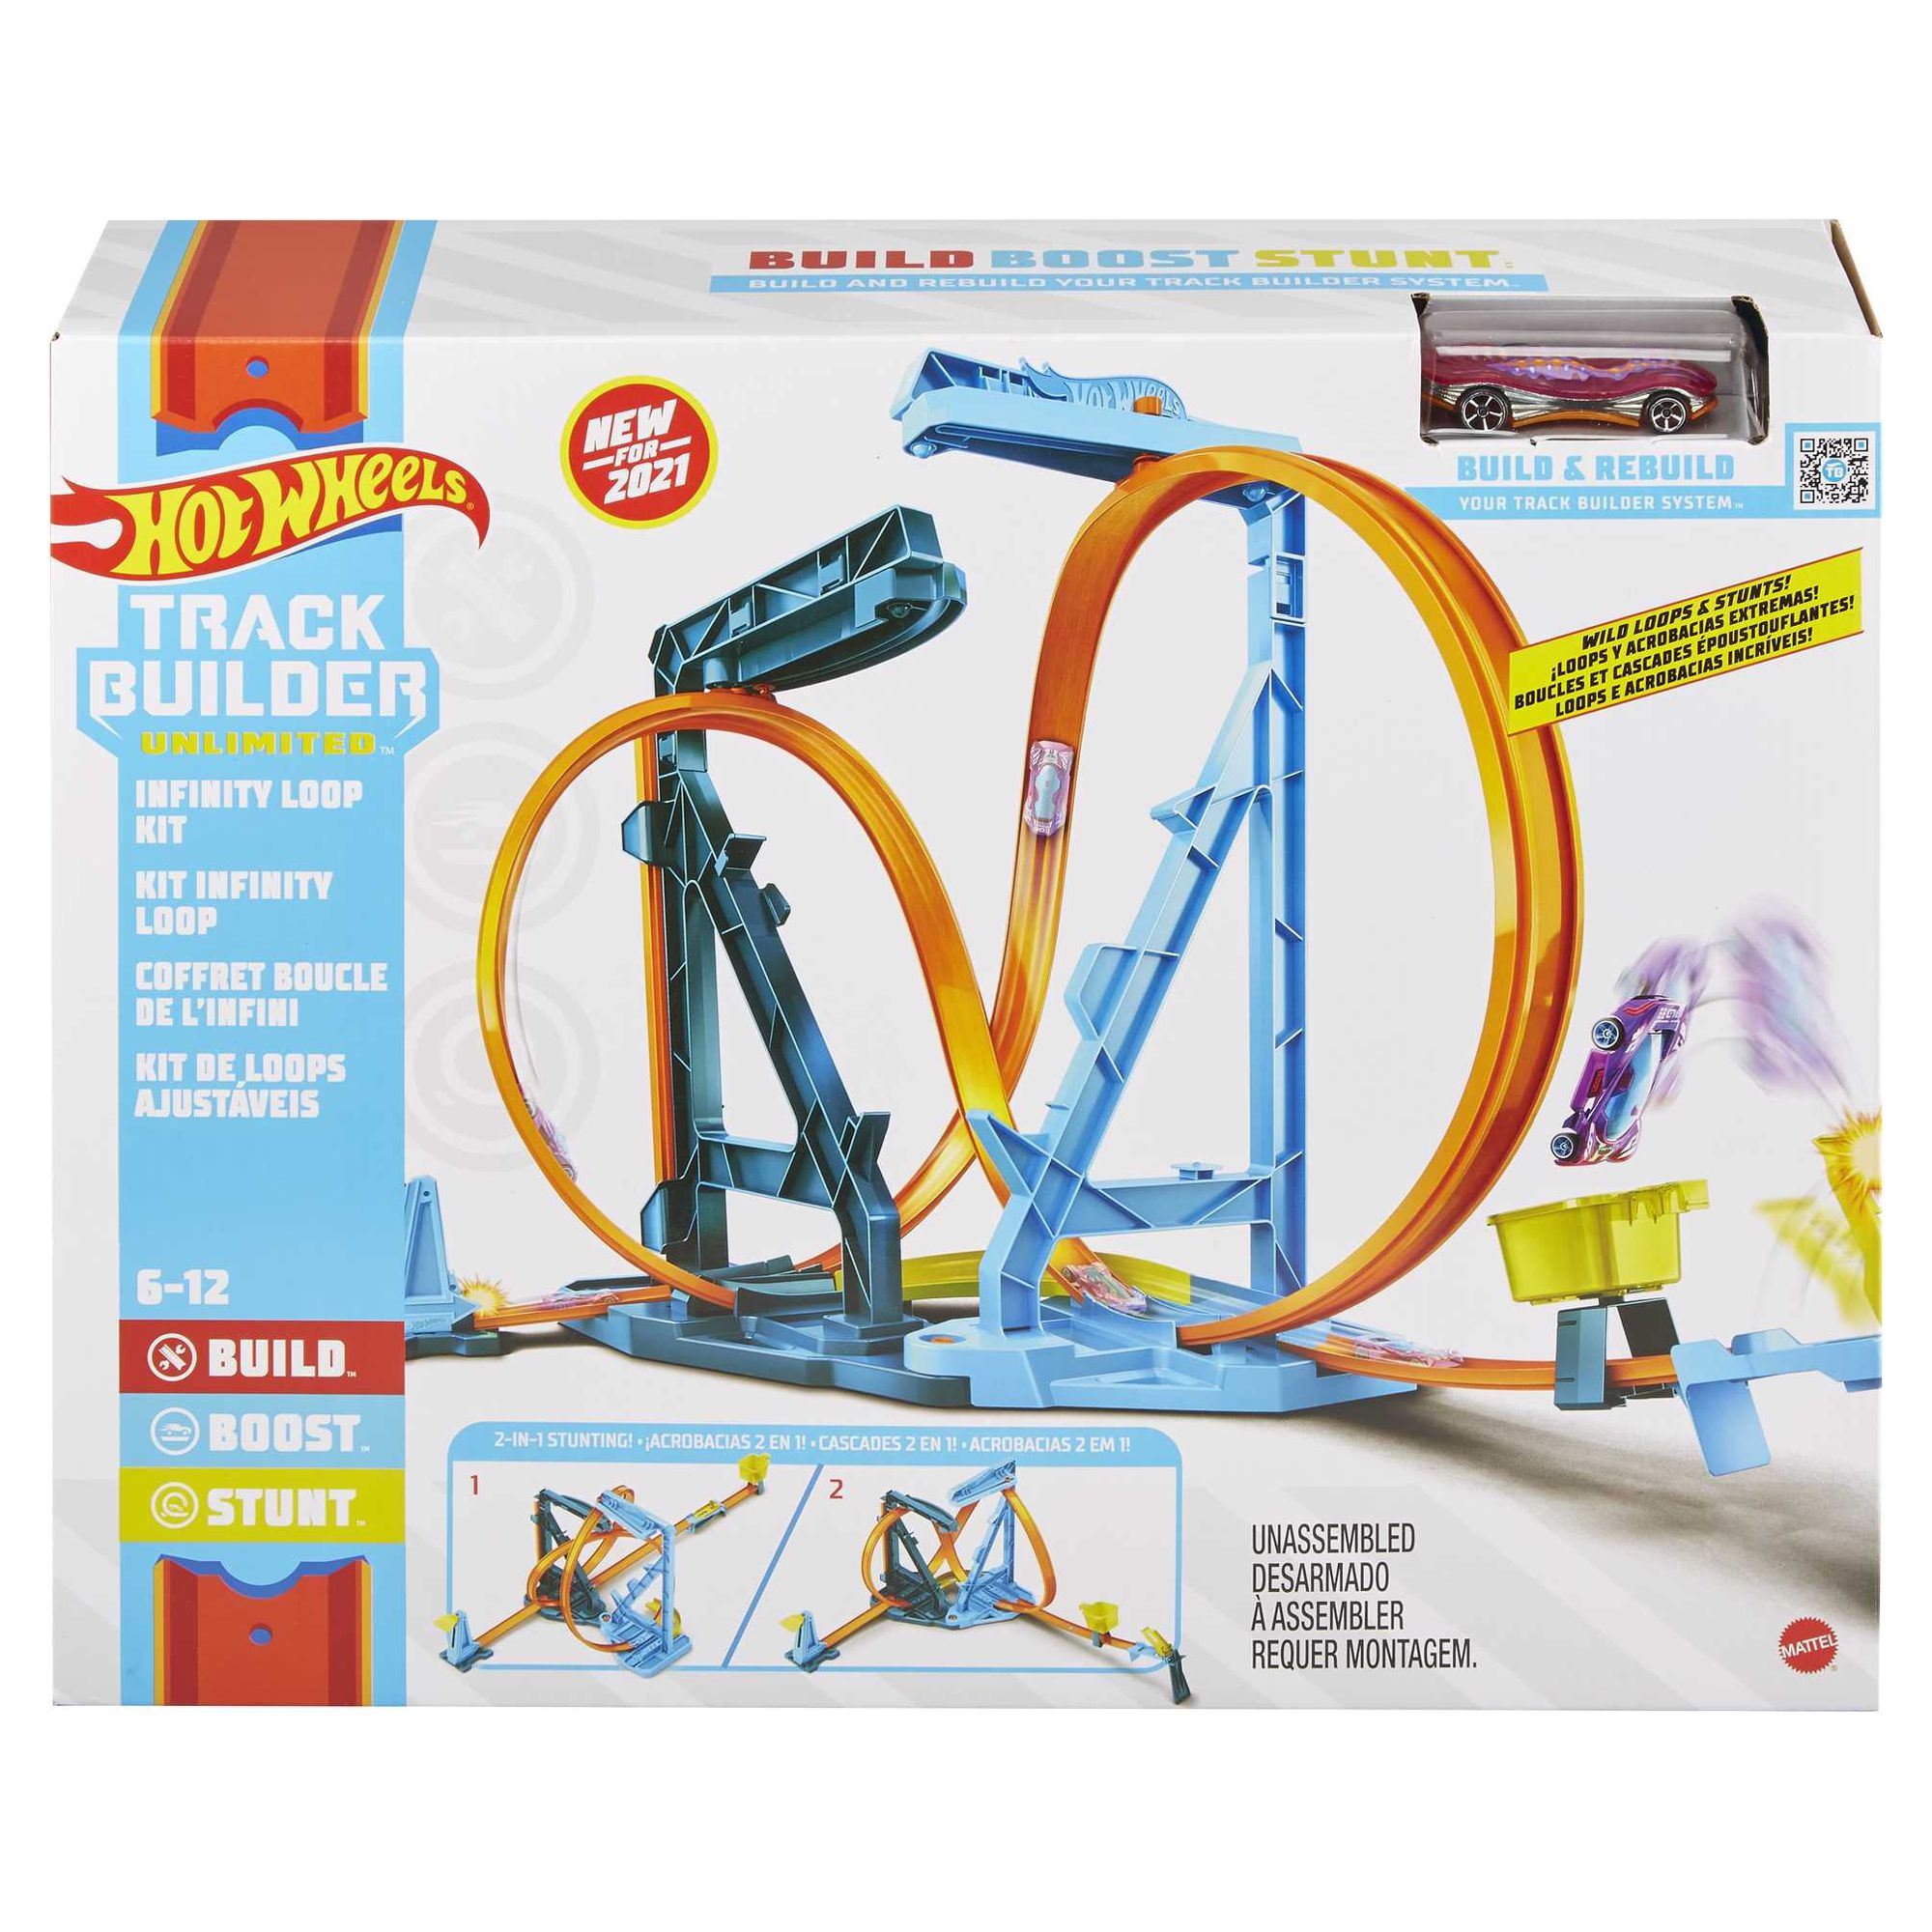 Hot Wheels Track Builder Unlimited Infinity Loop Kit Track Set & 1 Toy Car In 1:64 Scale - image 7 of 7